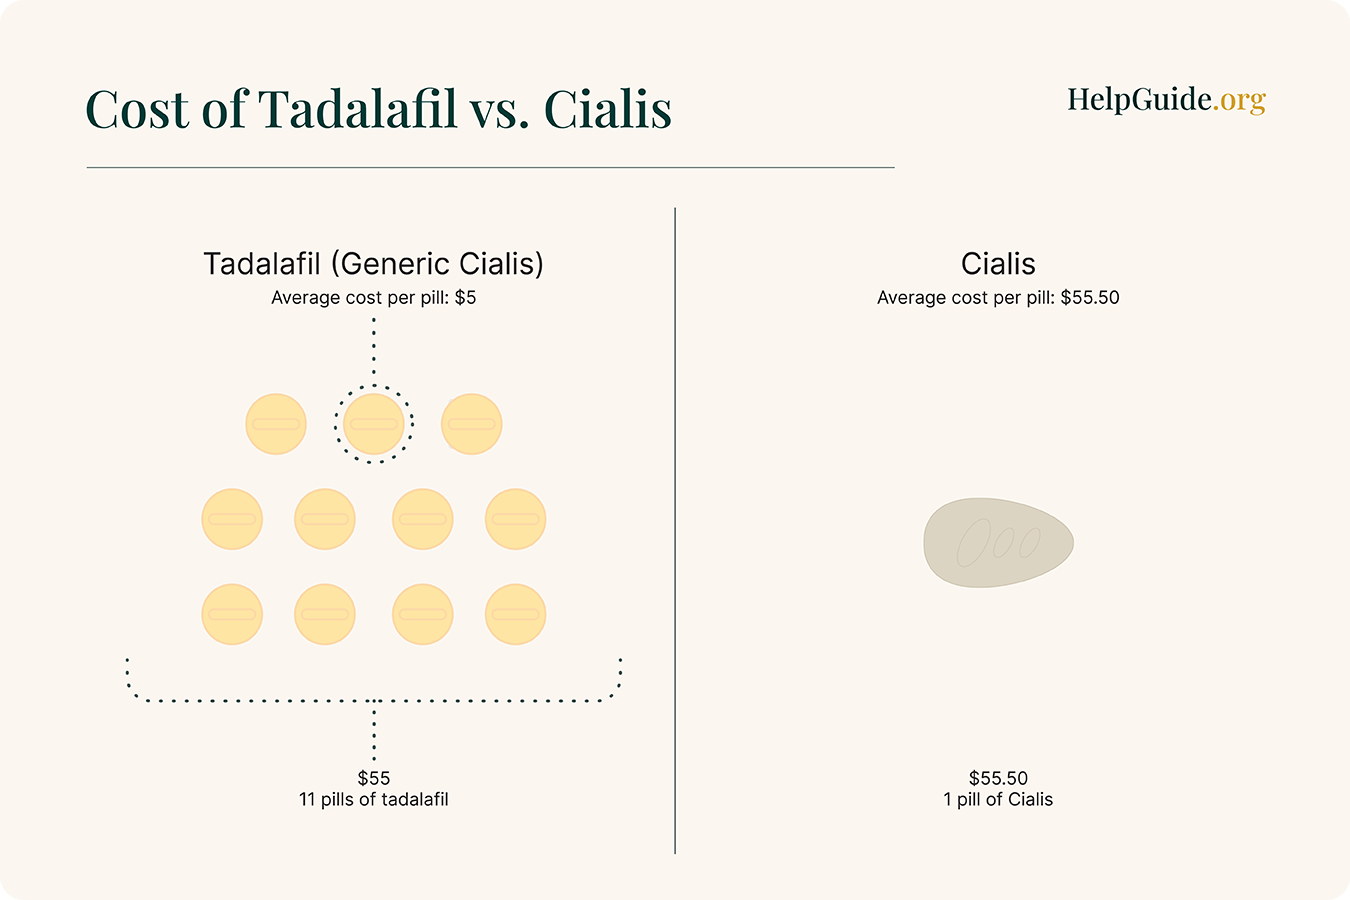 Graphic showing 11 tadalafil pills can be purchased for the price of one Cialis pill